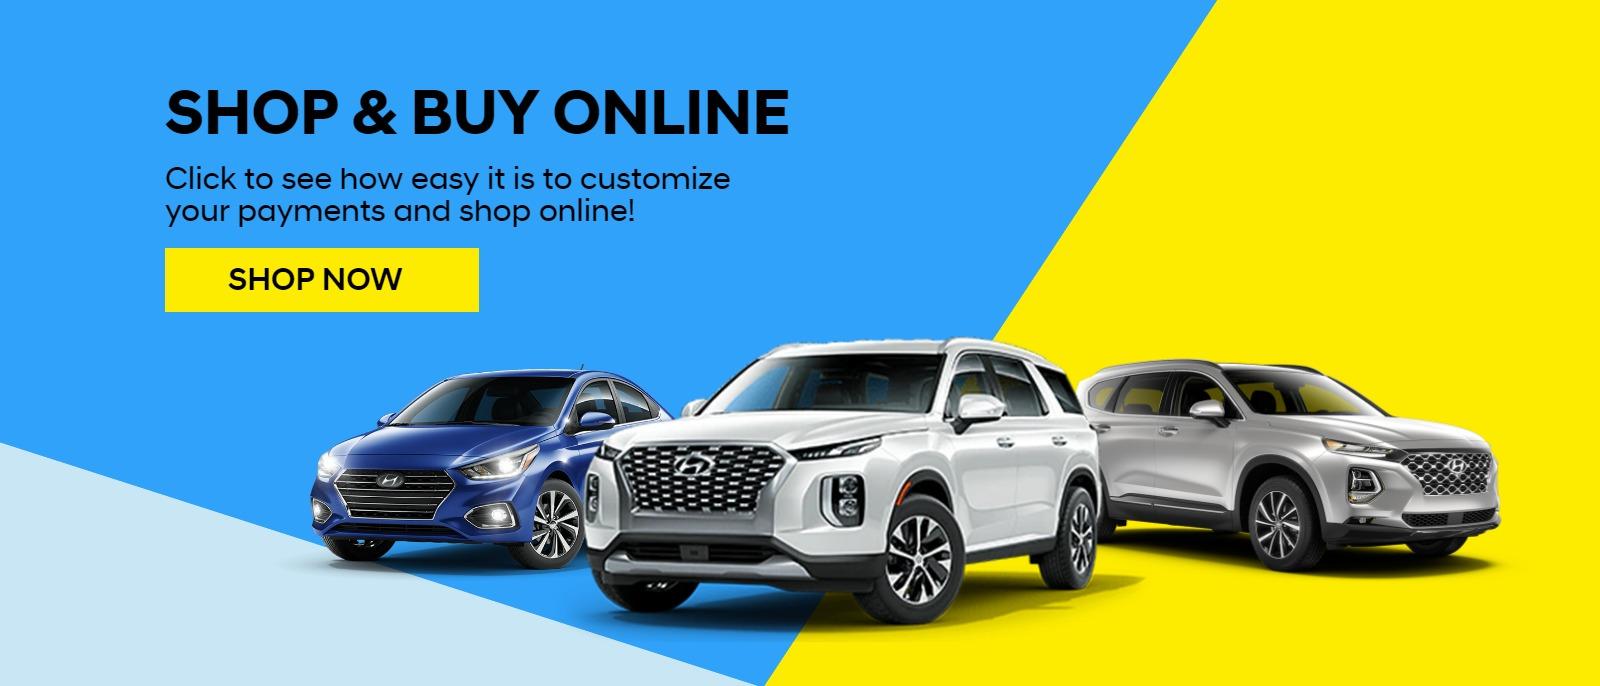 shop and buy online click to see how easy it is to customize your payments and shop online!